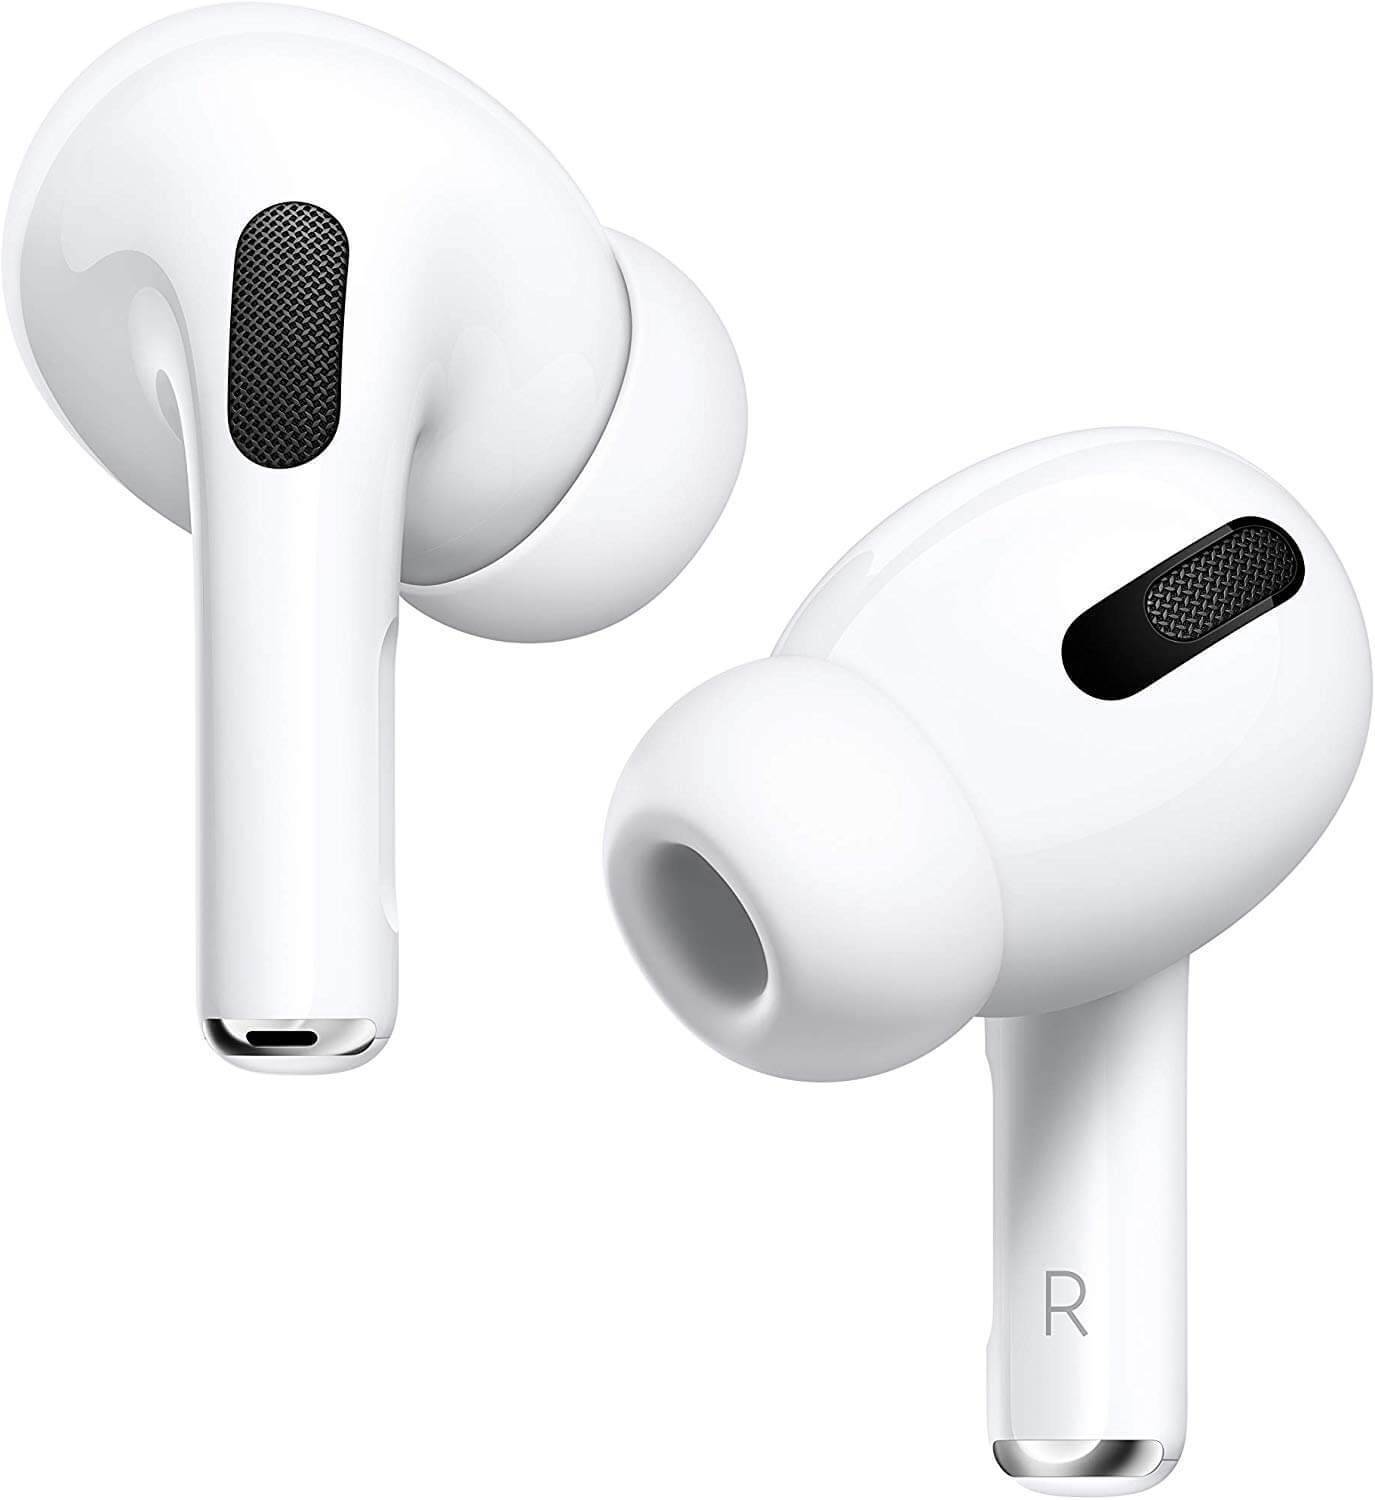 CJsGo | Overall the Apple Airpods Pro are very comfortable, have excellent sound quality and both the noise cancelation and sound passthrough worked really well and were impressive.